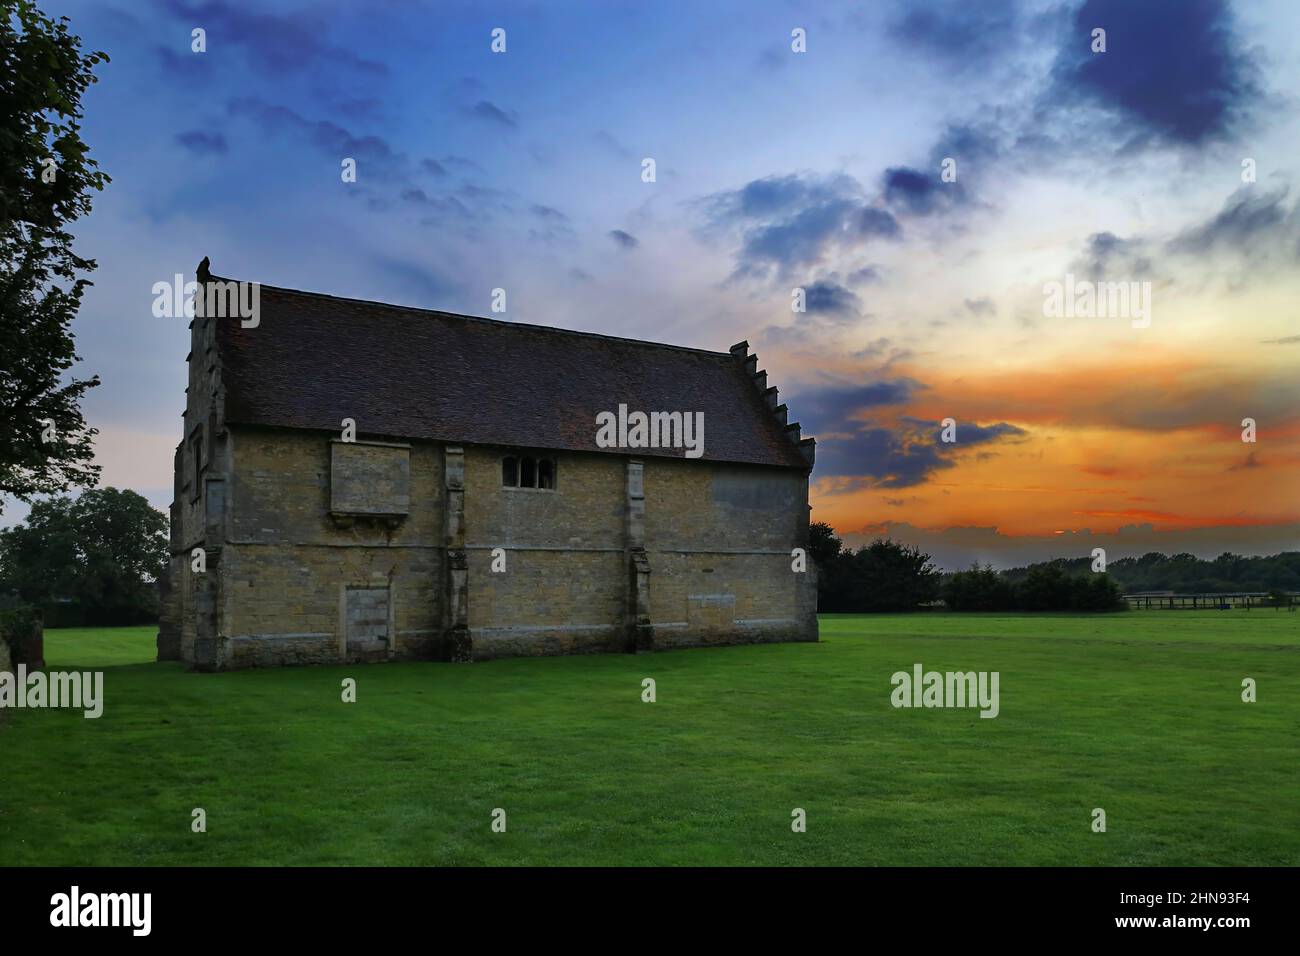 The Stables at Sunset, Willington, Bedfordshire, Inghilterra, Regno Unito Foto Stock